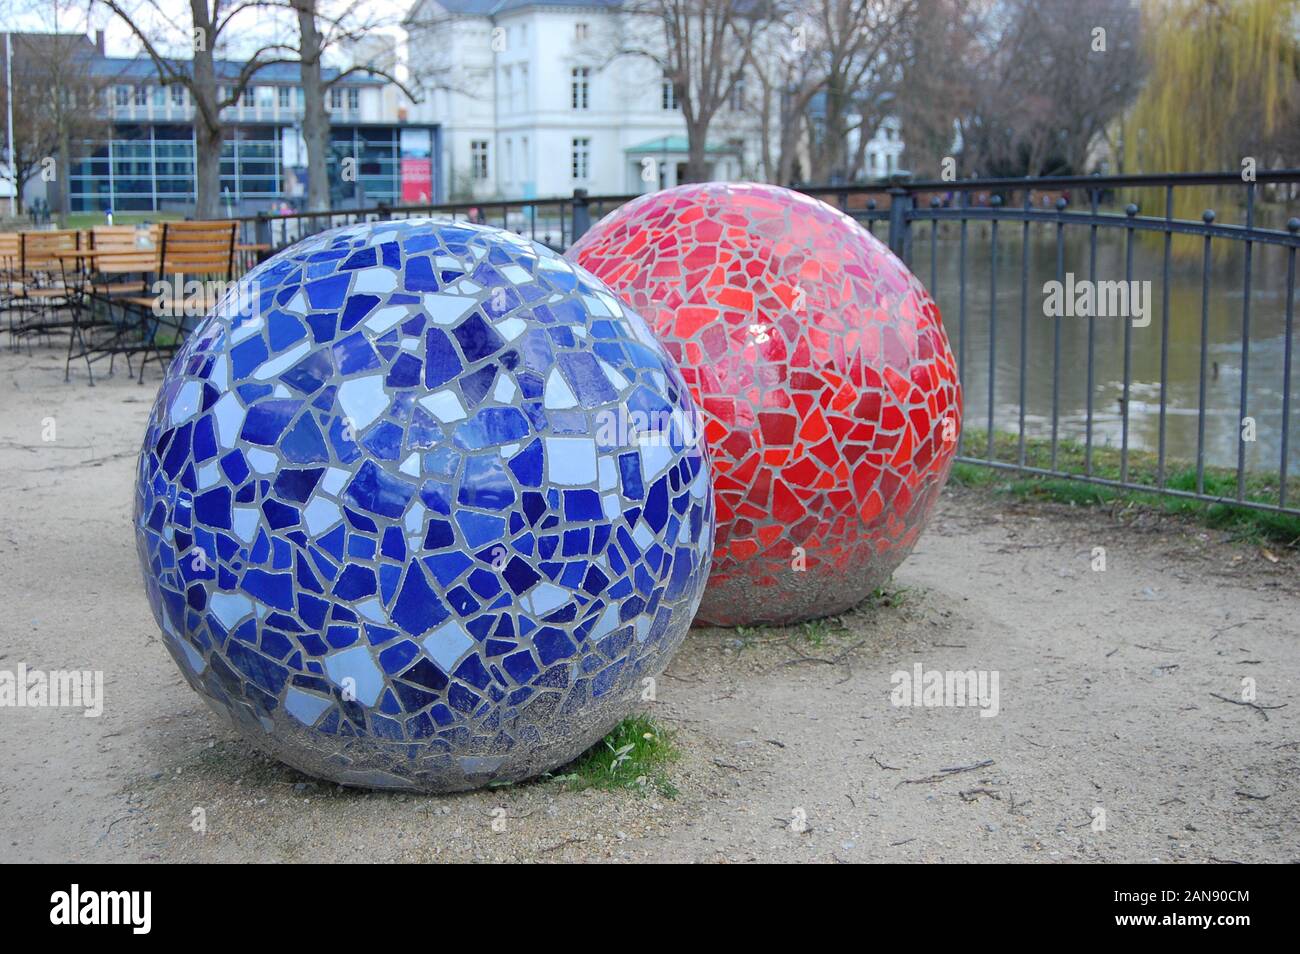 Big balls in a park Stock Photo - Alamy